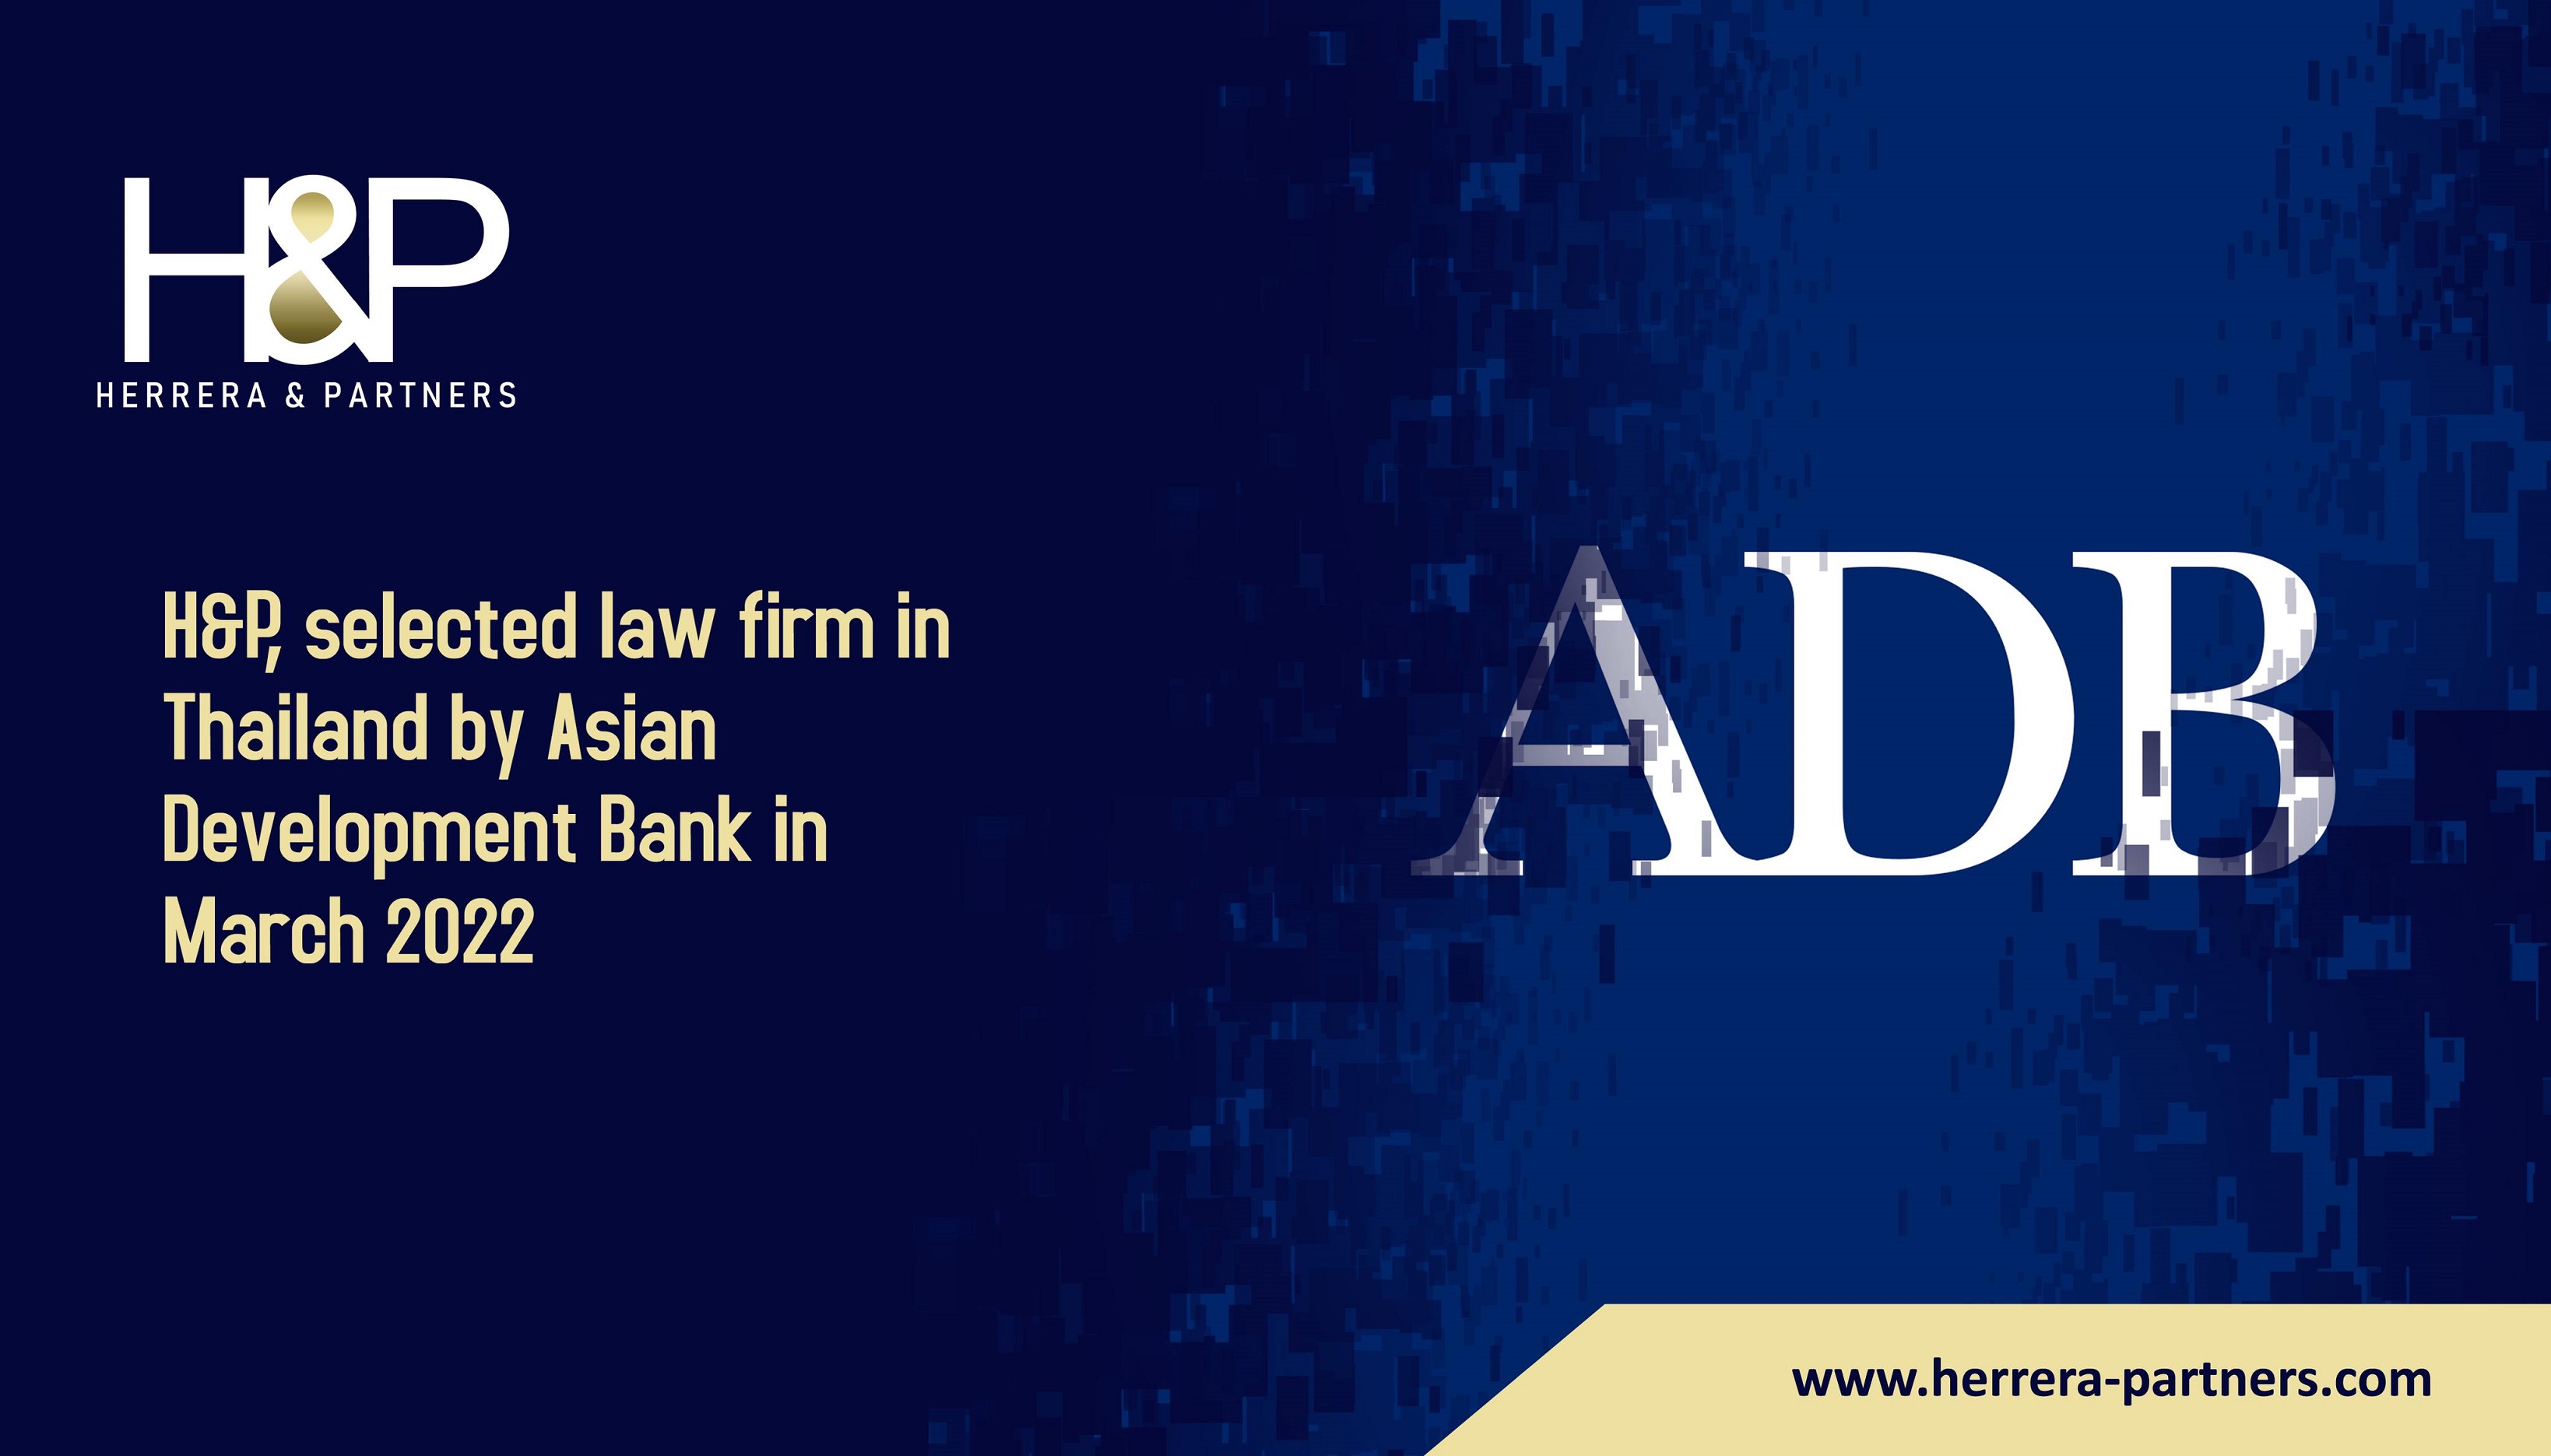 H&P, selected law firm in Thailand by Asian Development Bank in March 2022